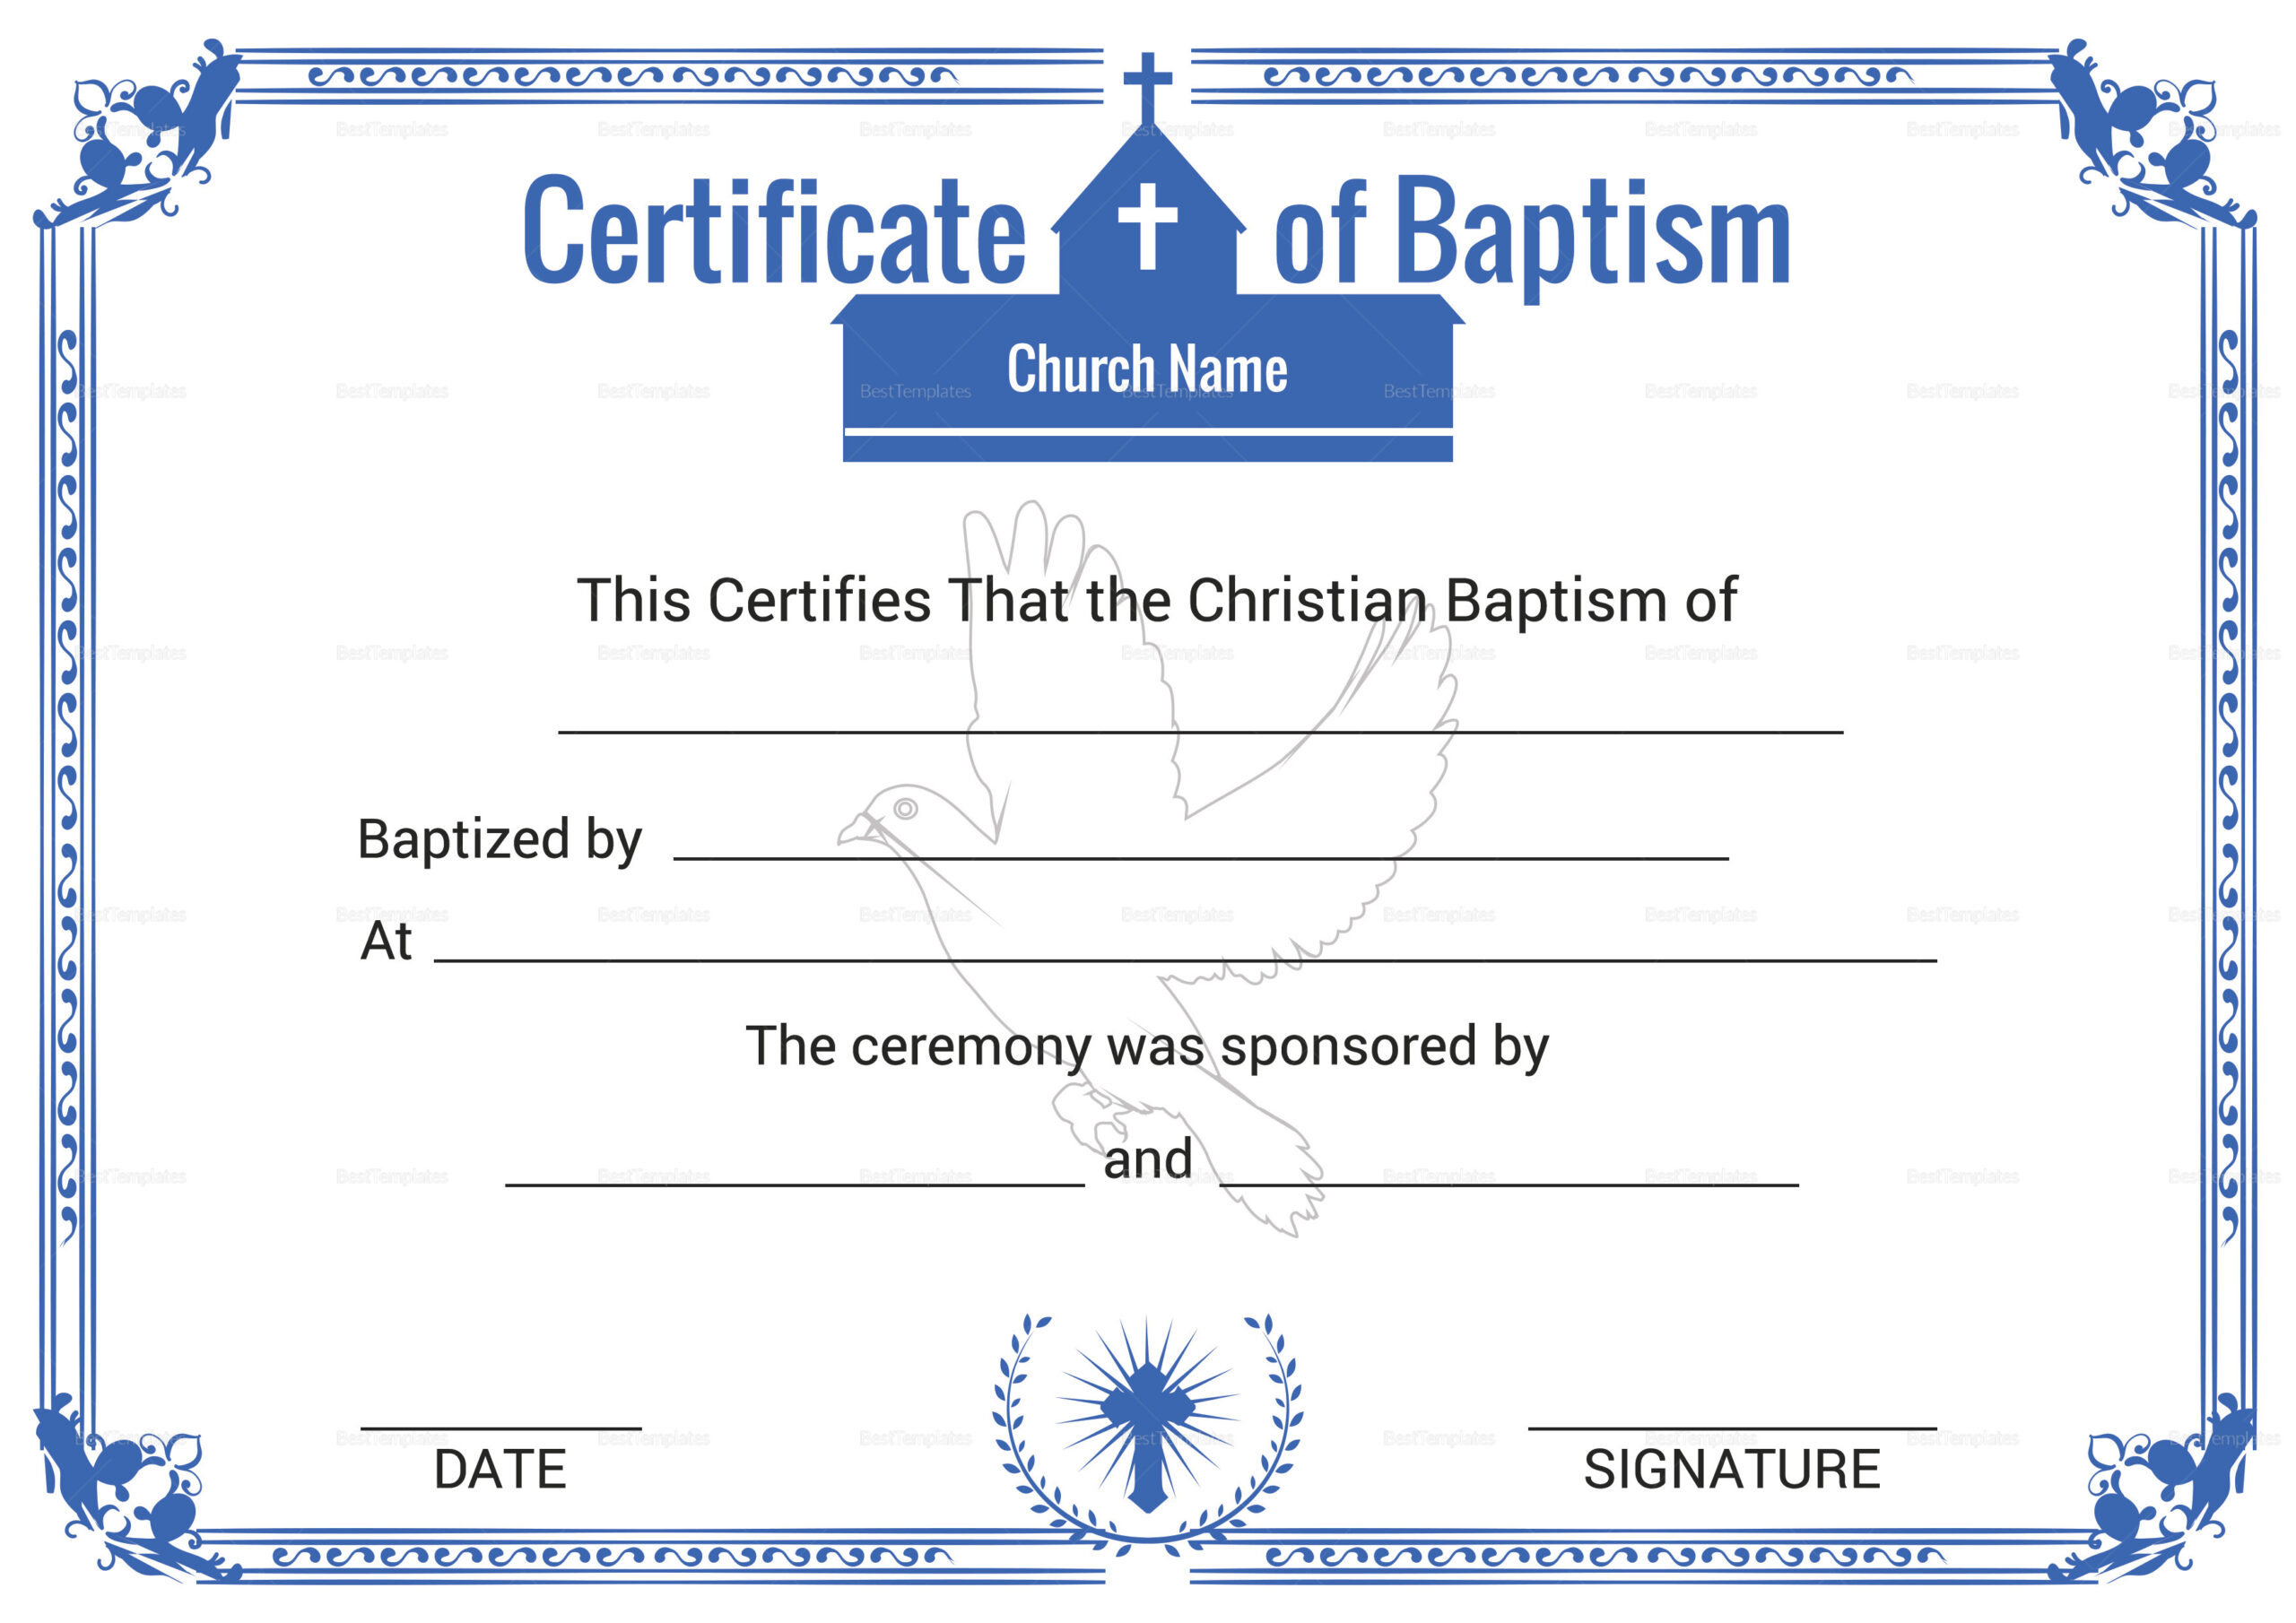 Christian Baptism Certificate Template in Adobe Photoshop